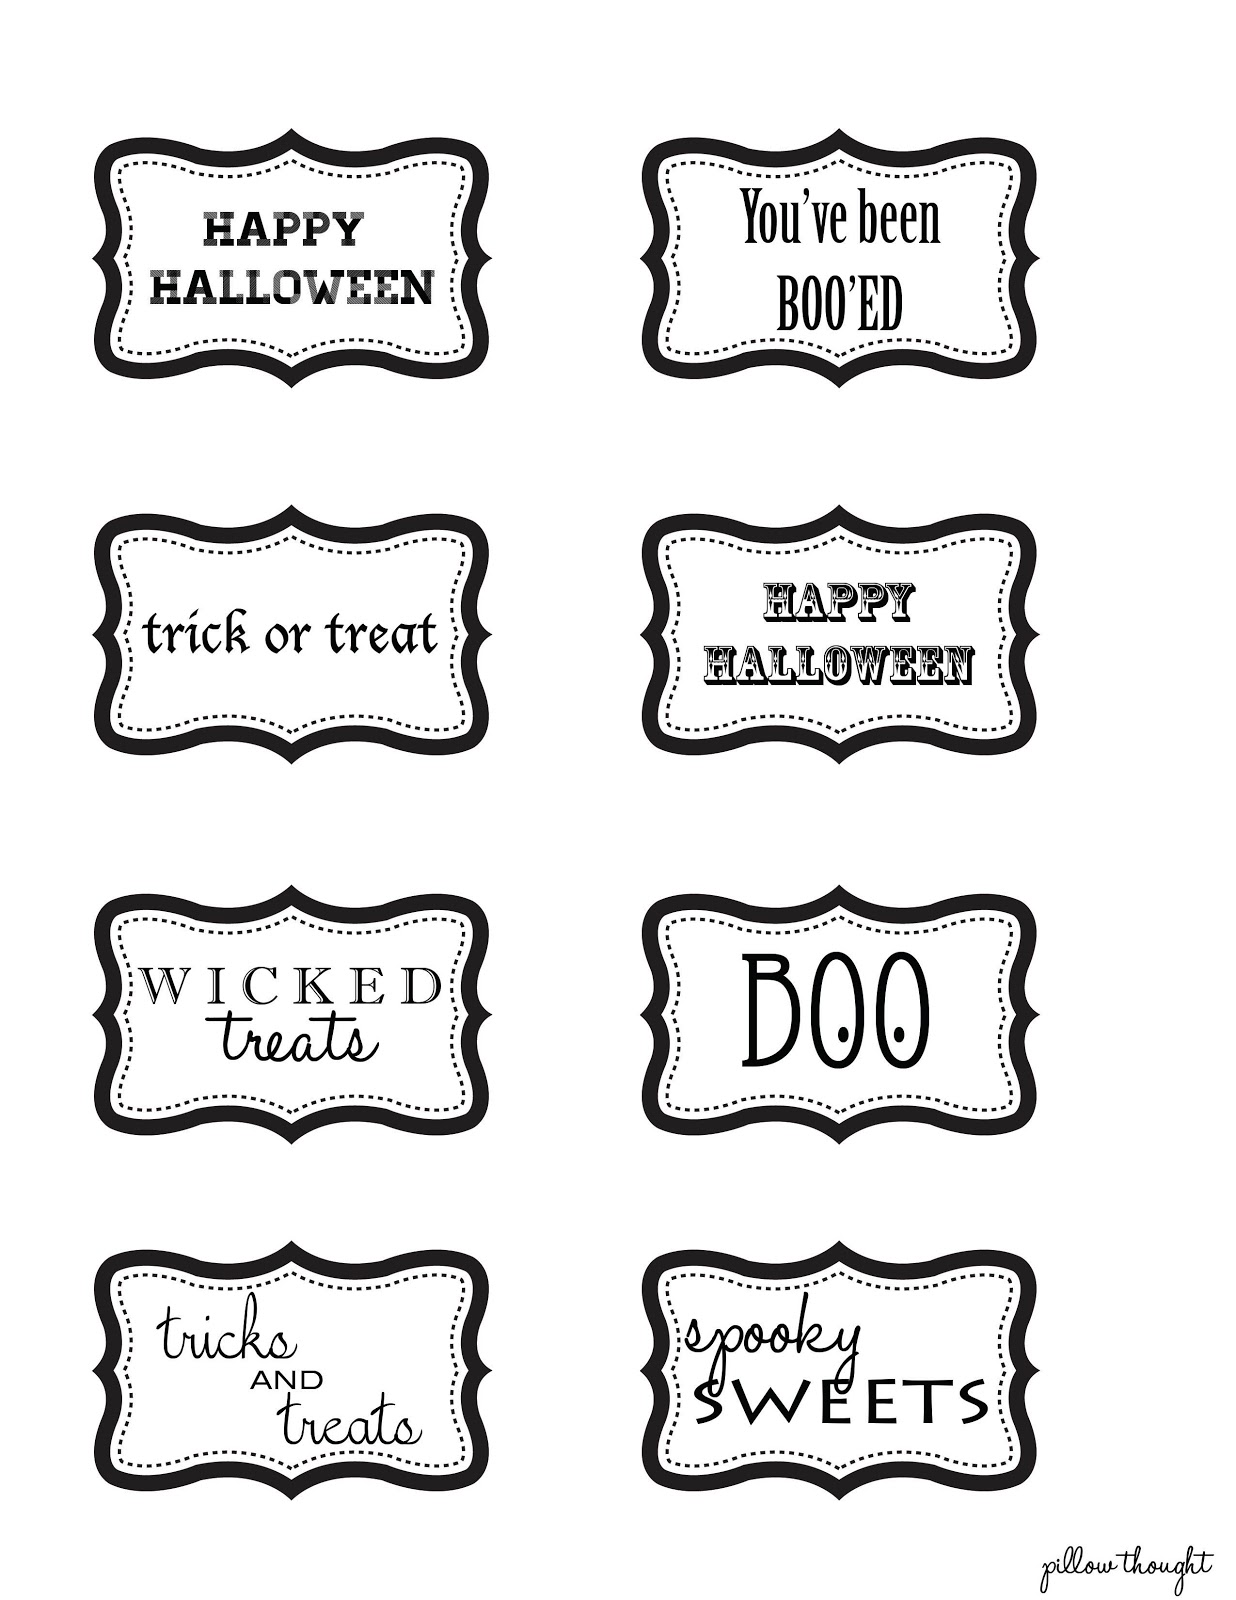 Pillow Thought Halloween Gift Tag Printables